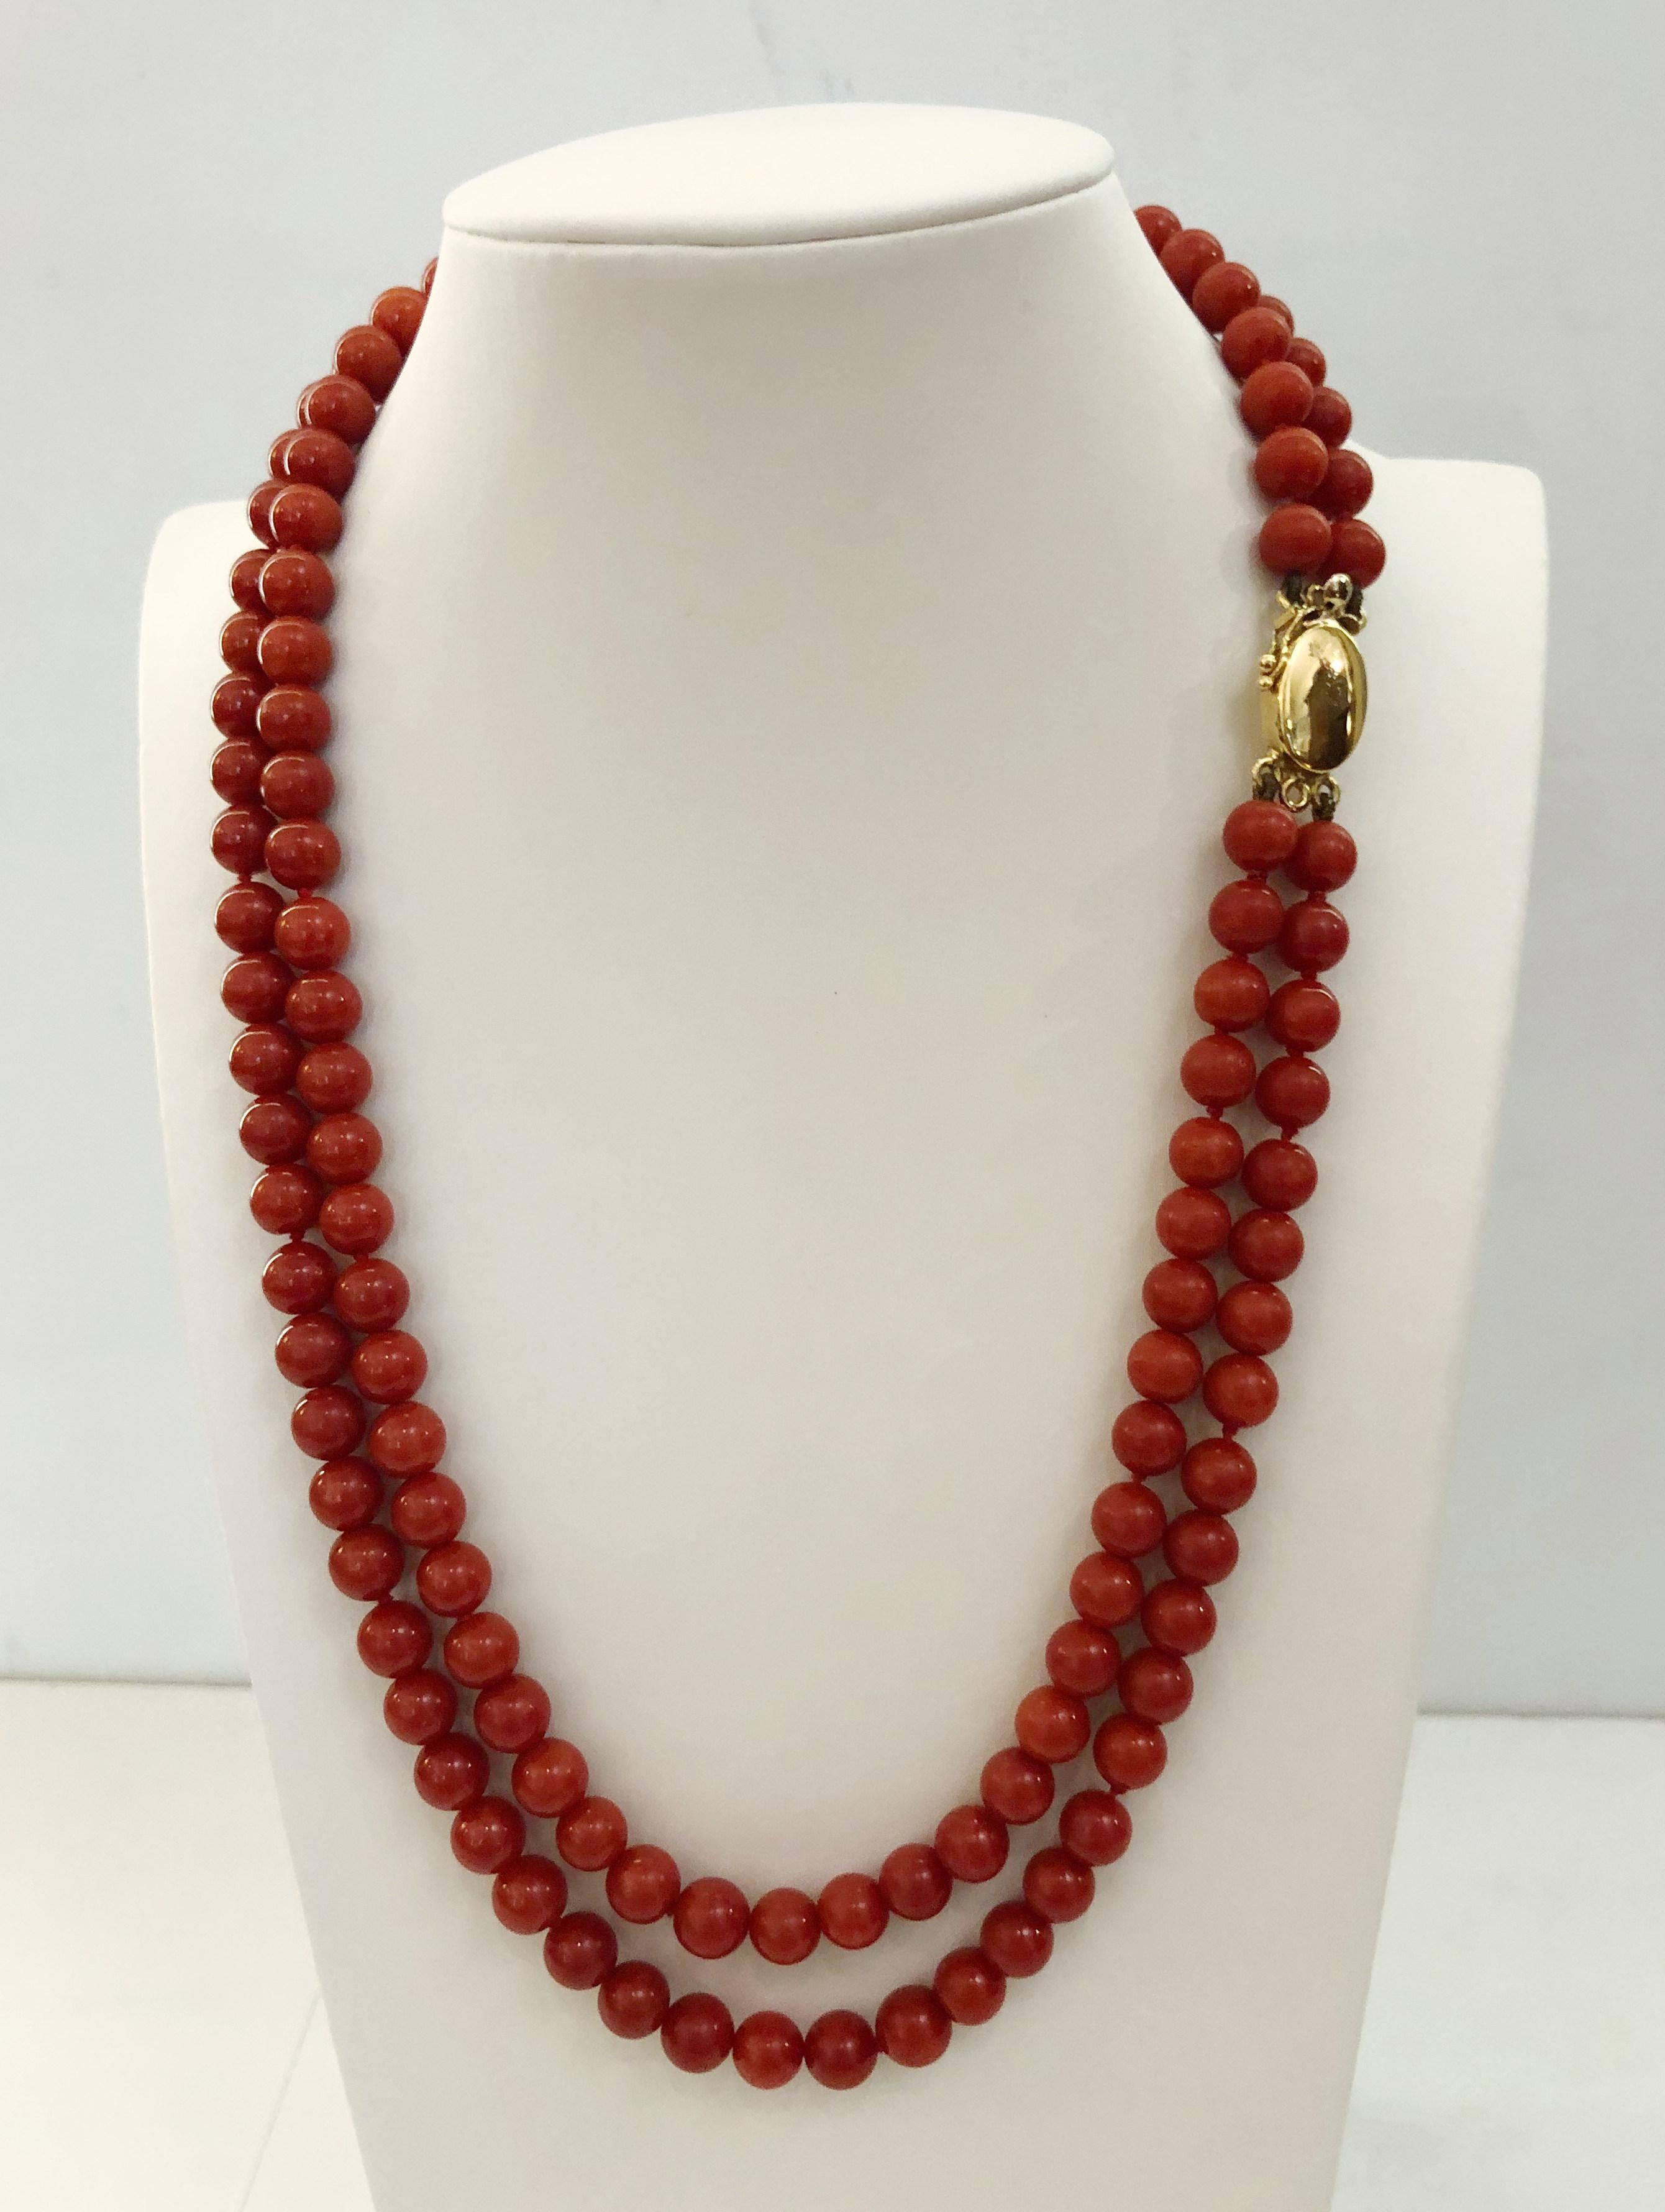 Vintage necklace with double strands of 7-7.5mm red corals and 18 karat yellow gold clasp / Italy 1960-1970s
Length 47 cm